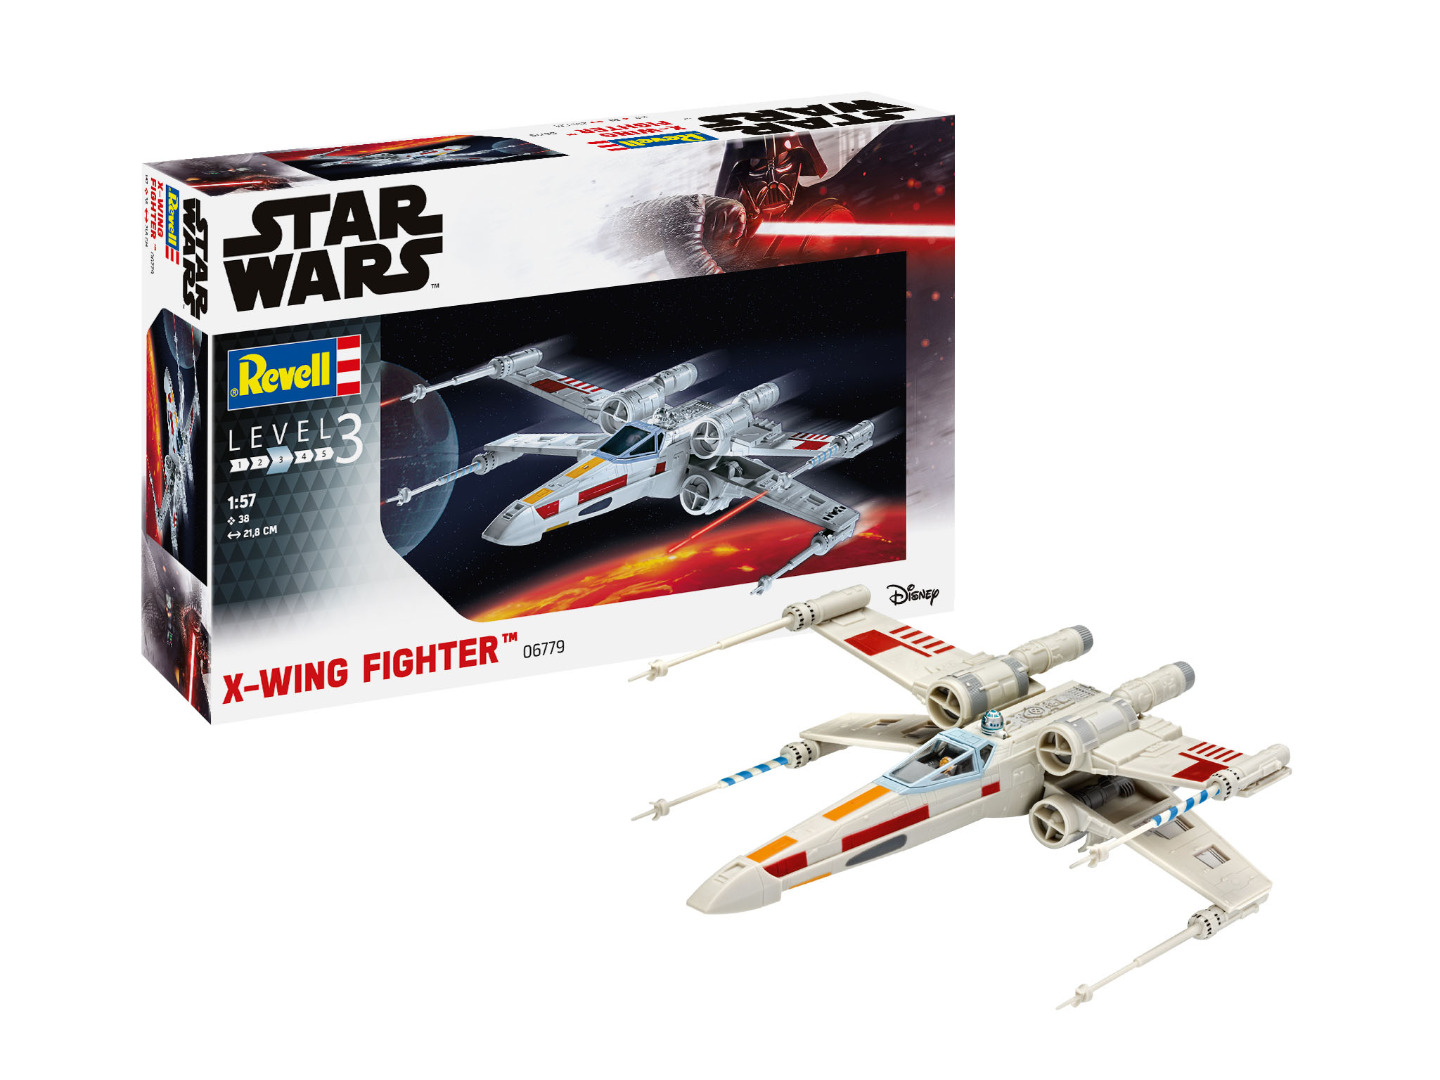 Revell Model Kit Star Wars X-Wing Fighter Scale 1:57